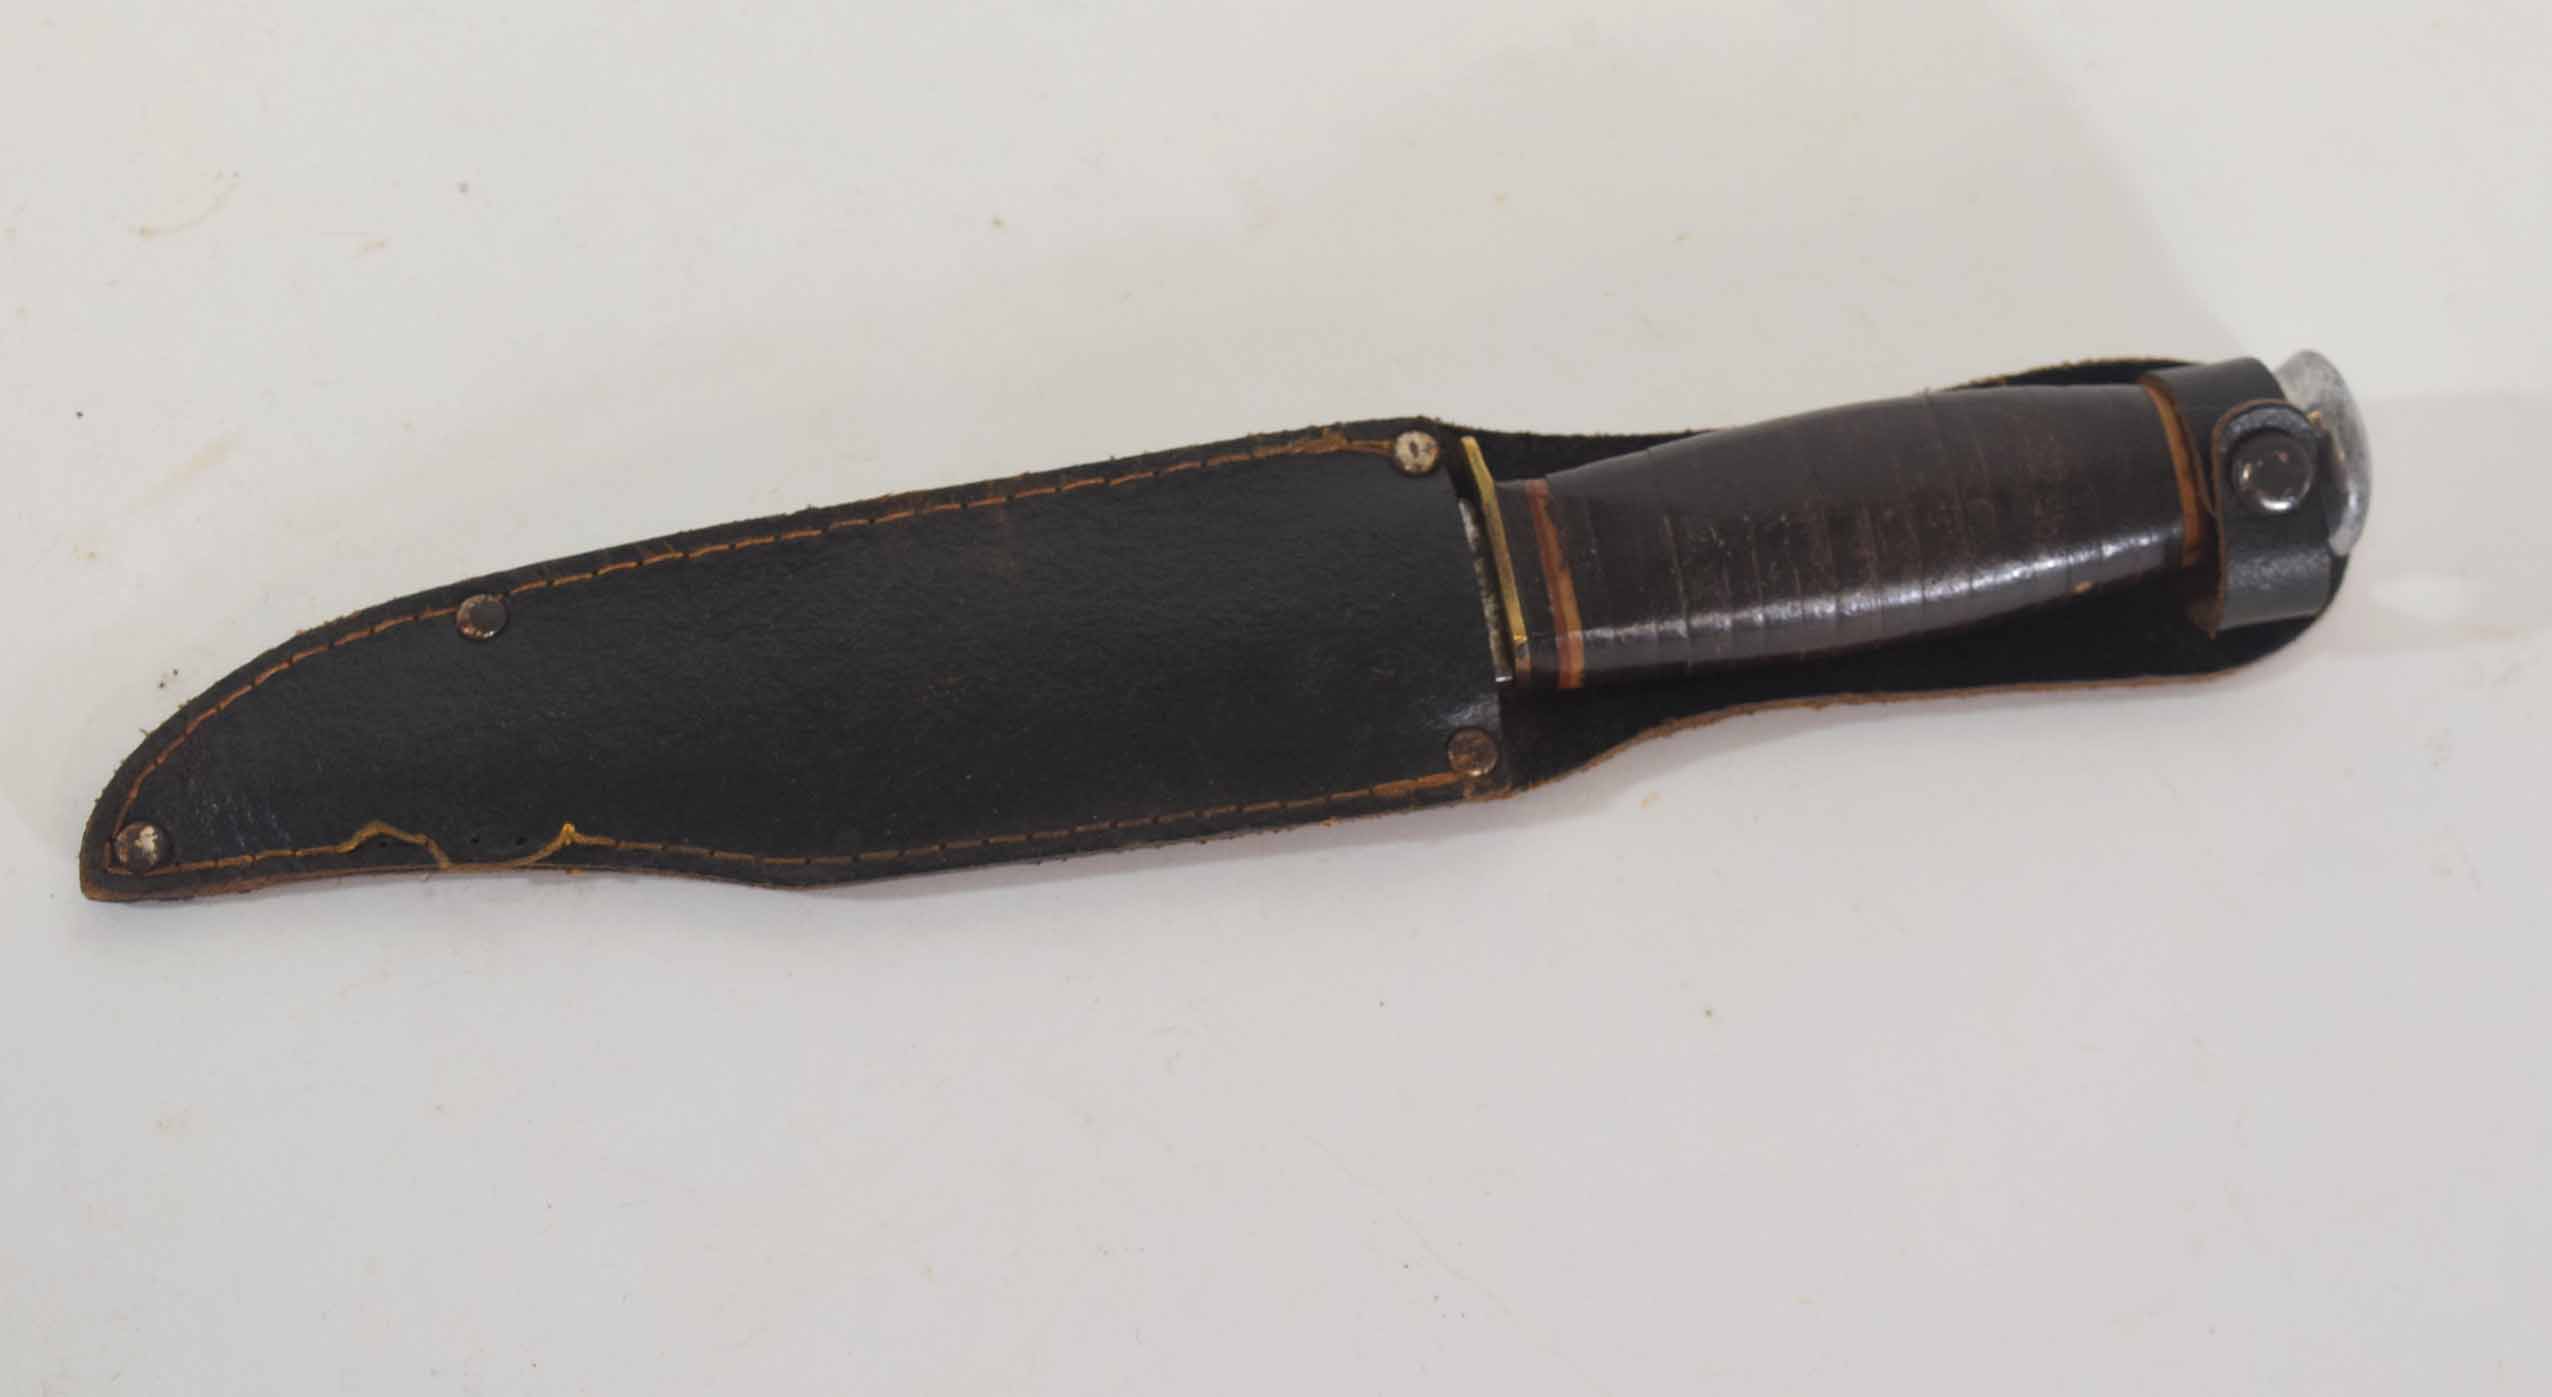 Bowie knife by Solar, blade inscribed "Original Bowie Knife", the steel blade above guard and